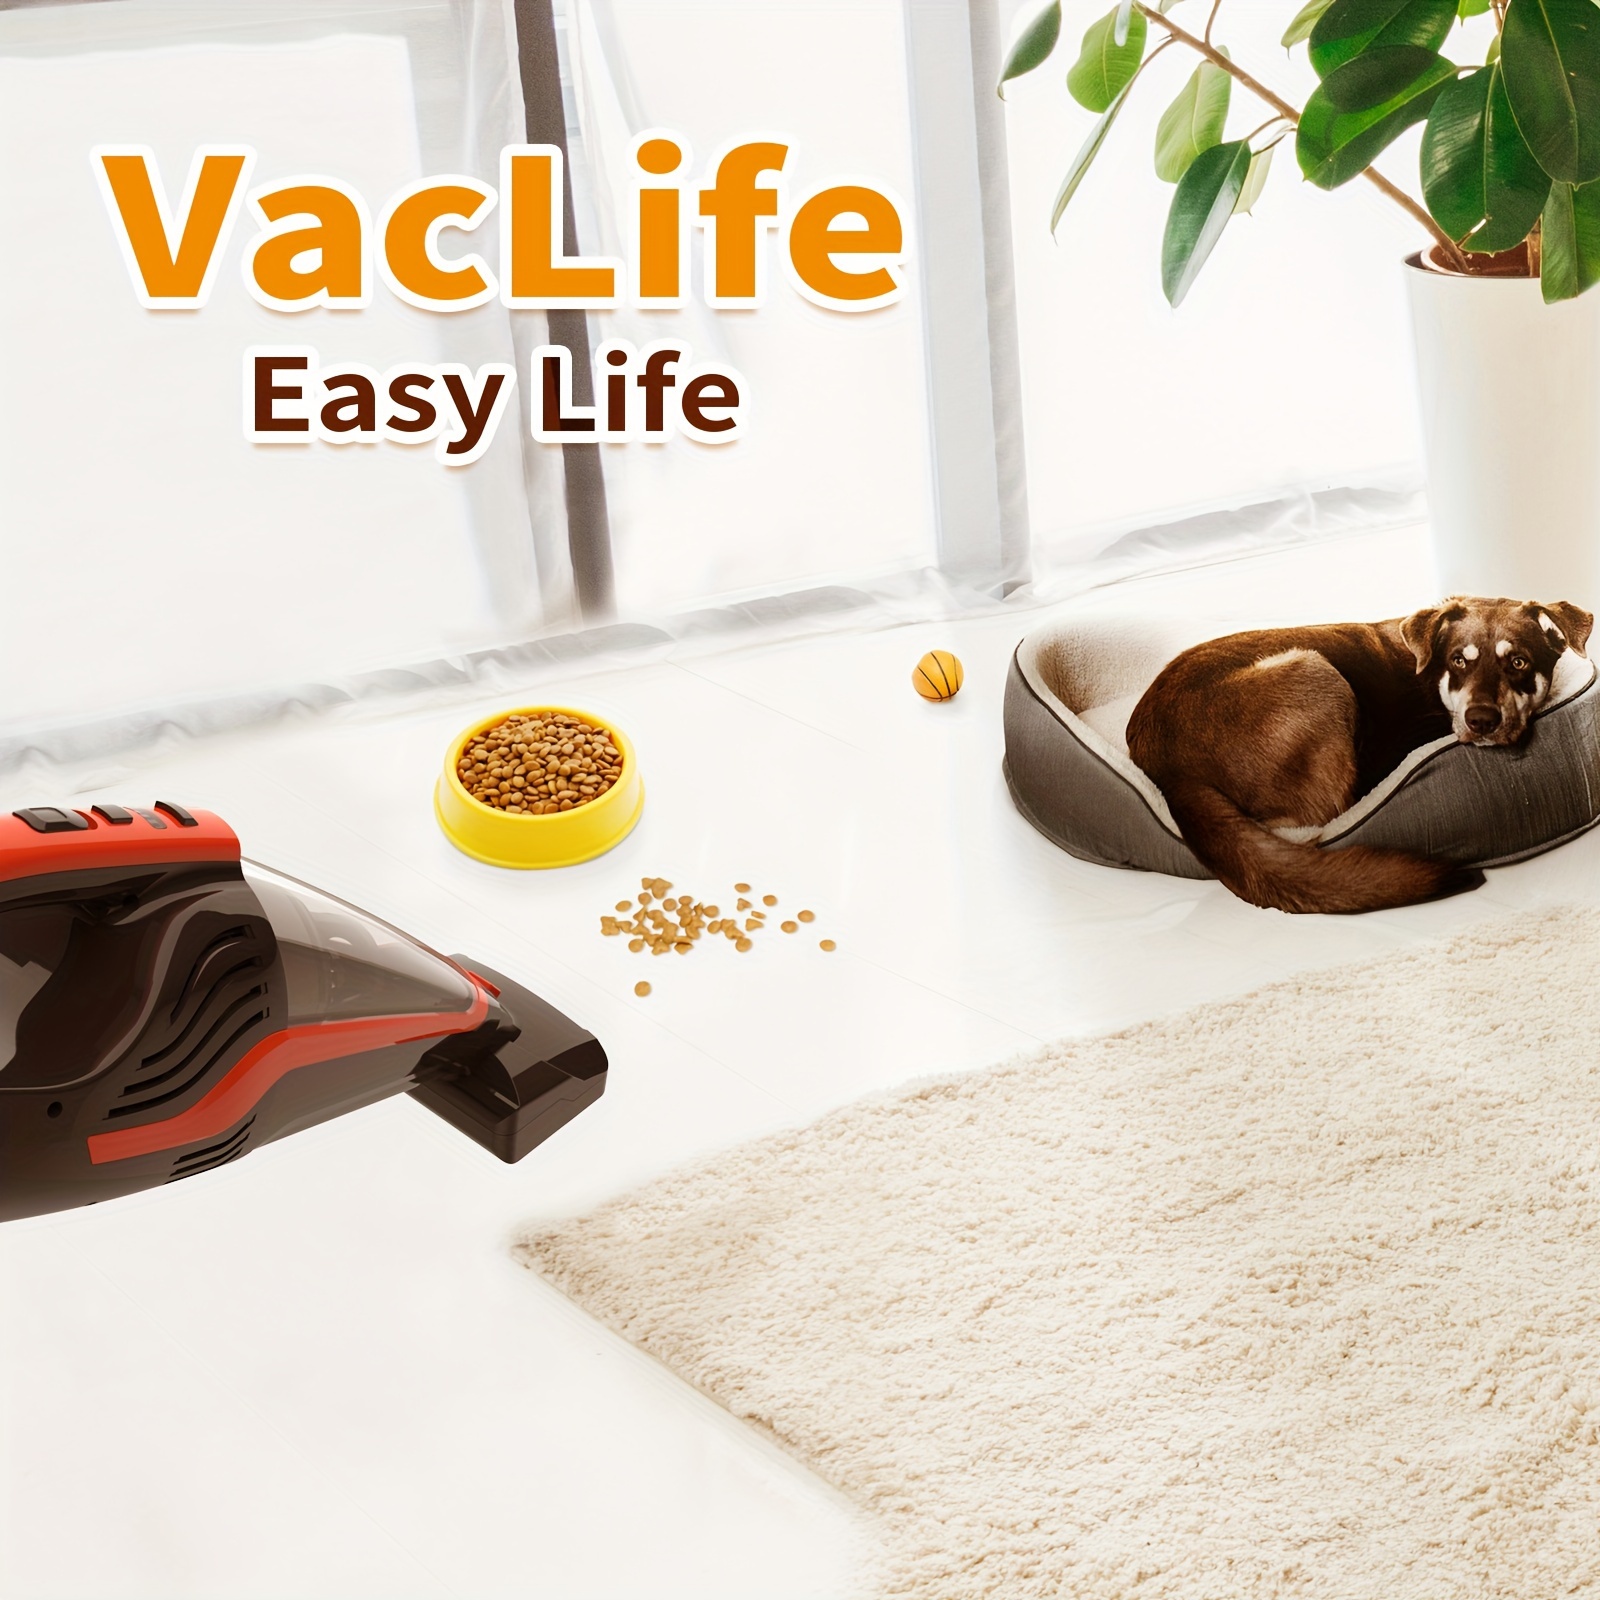 

Vaclife pet Hair Handheld Vacuum-cordless Handheld Vaccum, Well-equipped hand Vacuum with Led Light&reusable Filter, Rechargeable vacuum Cleaner For Pet Hair, Powerful Pet Vacuum with Motorized Brush